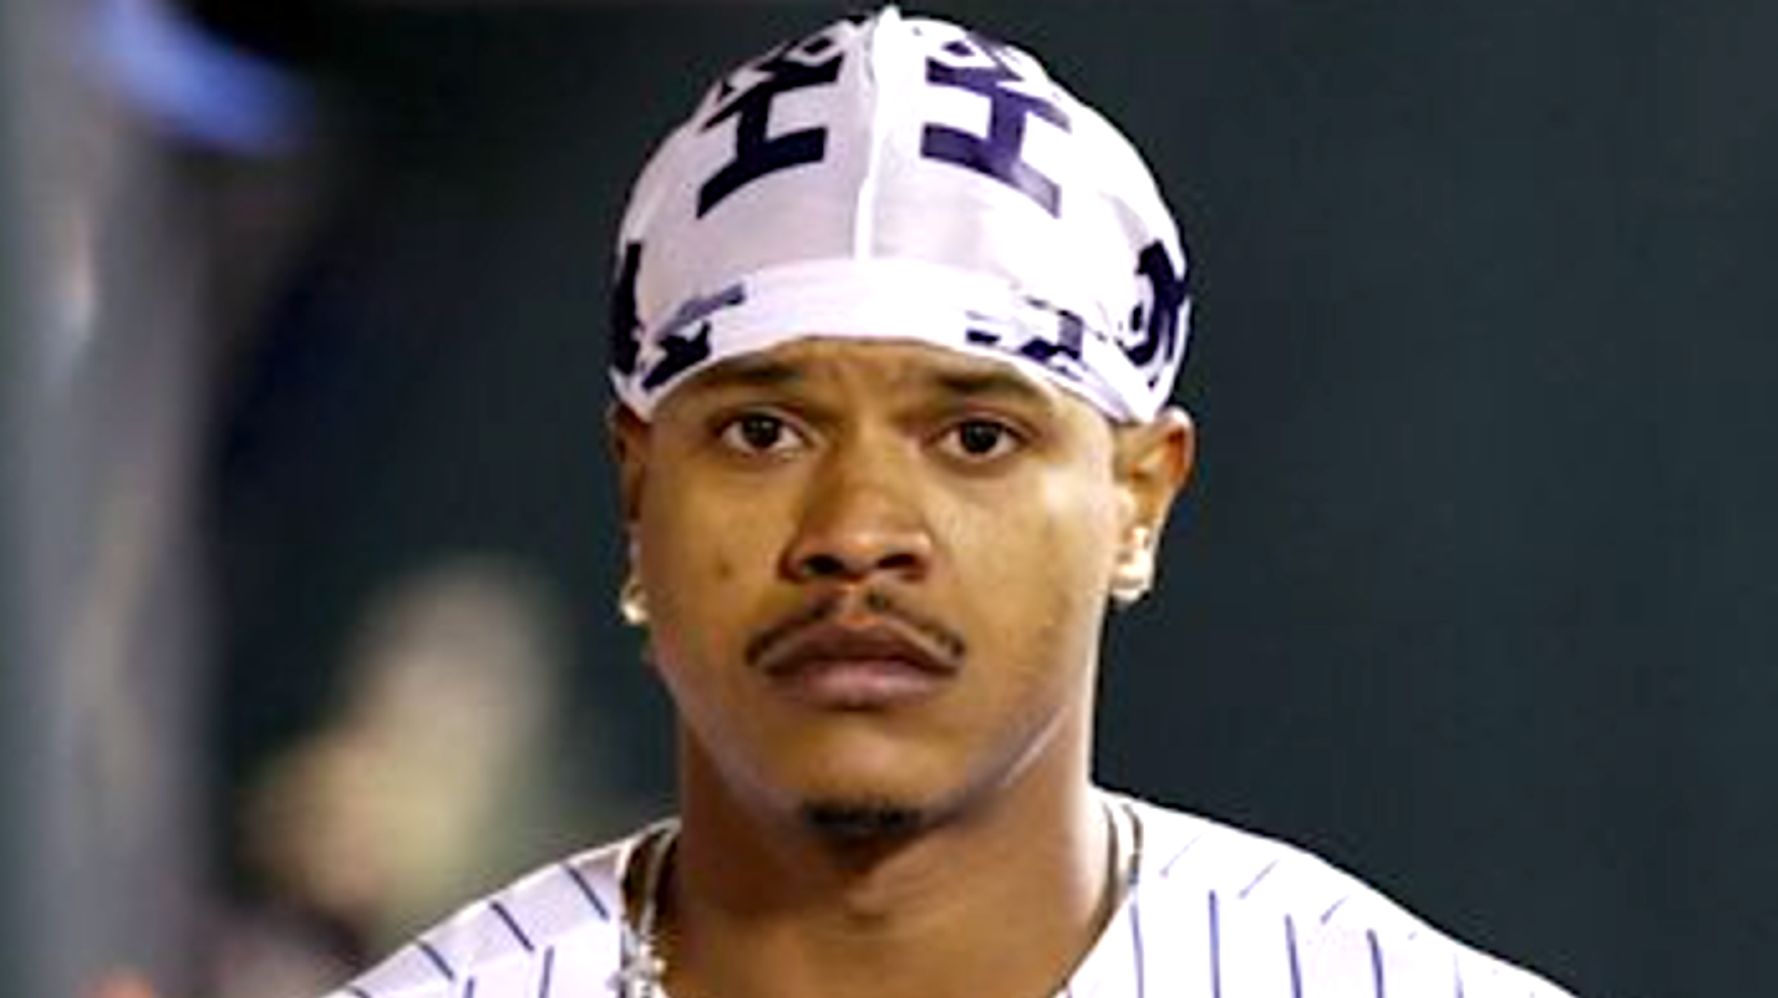 Mets Pitcher Marcus Stroman Calls Out Broadcaster Bob Brenly For Joking About His Do-Rag